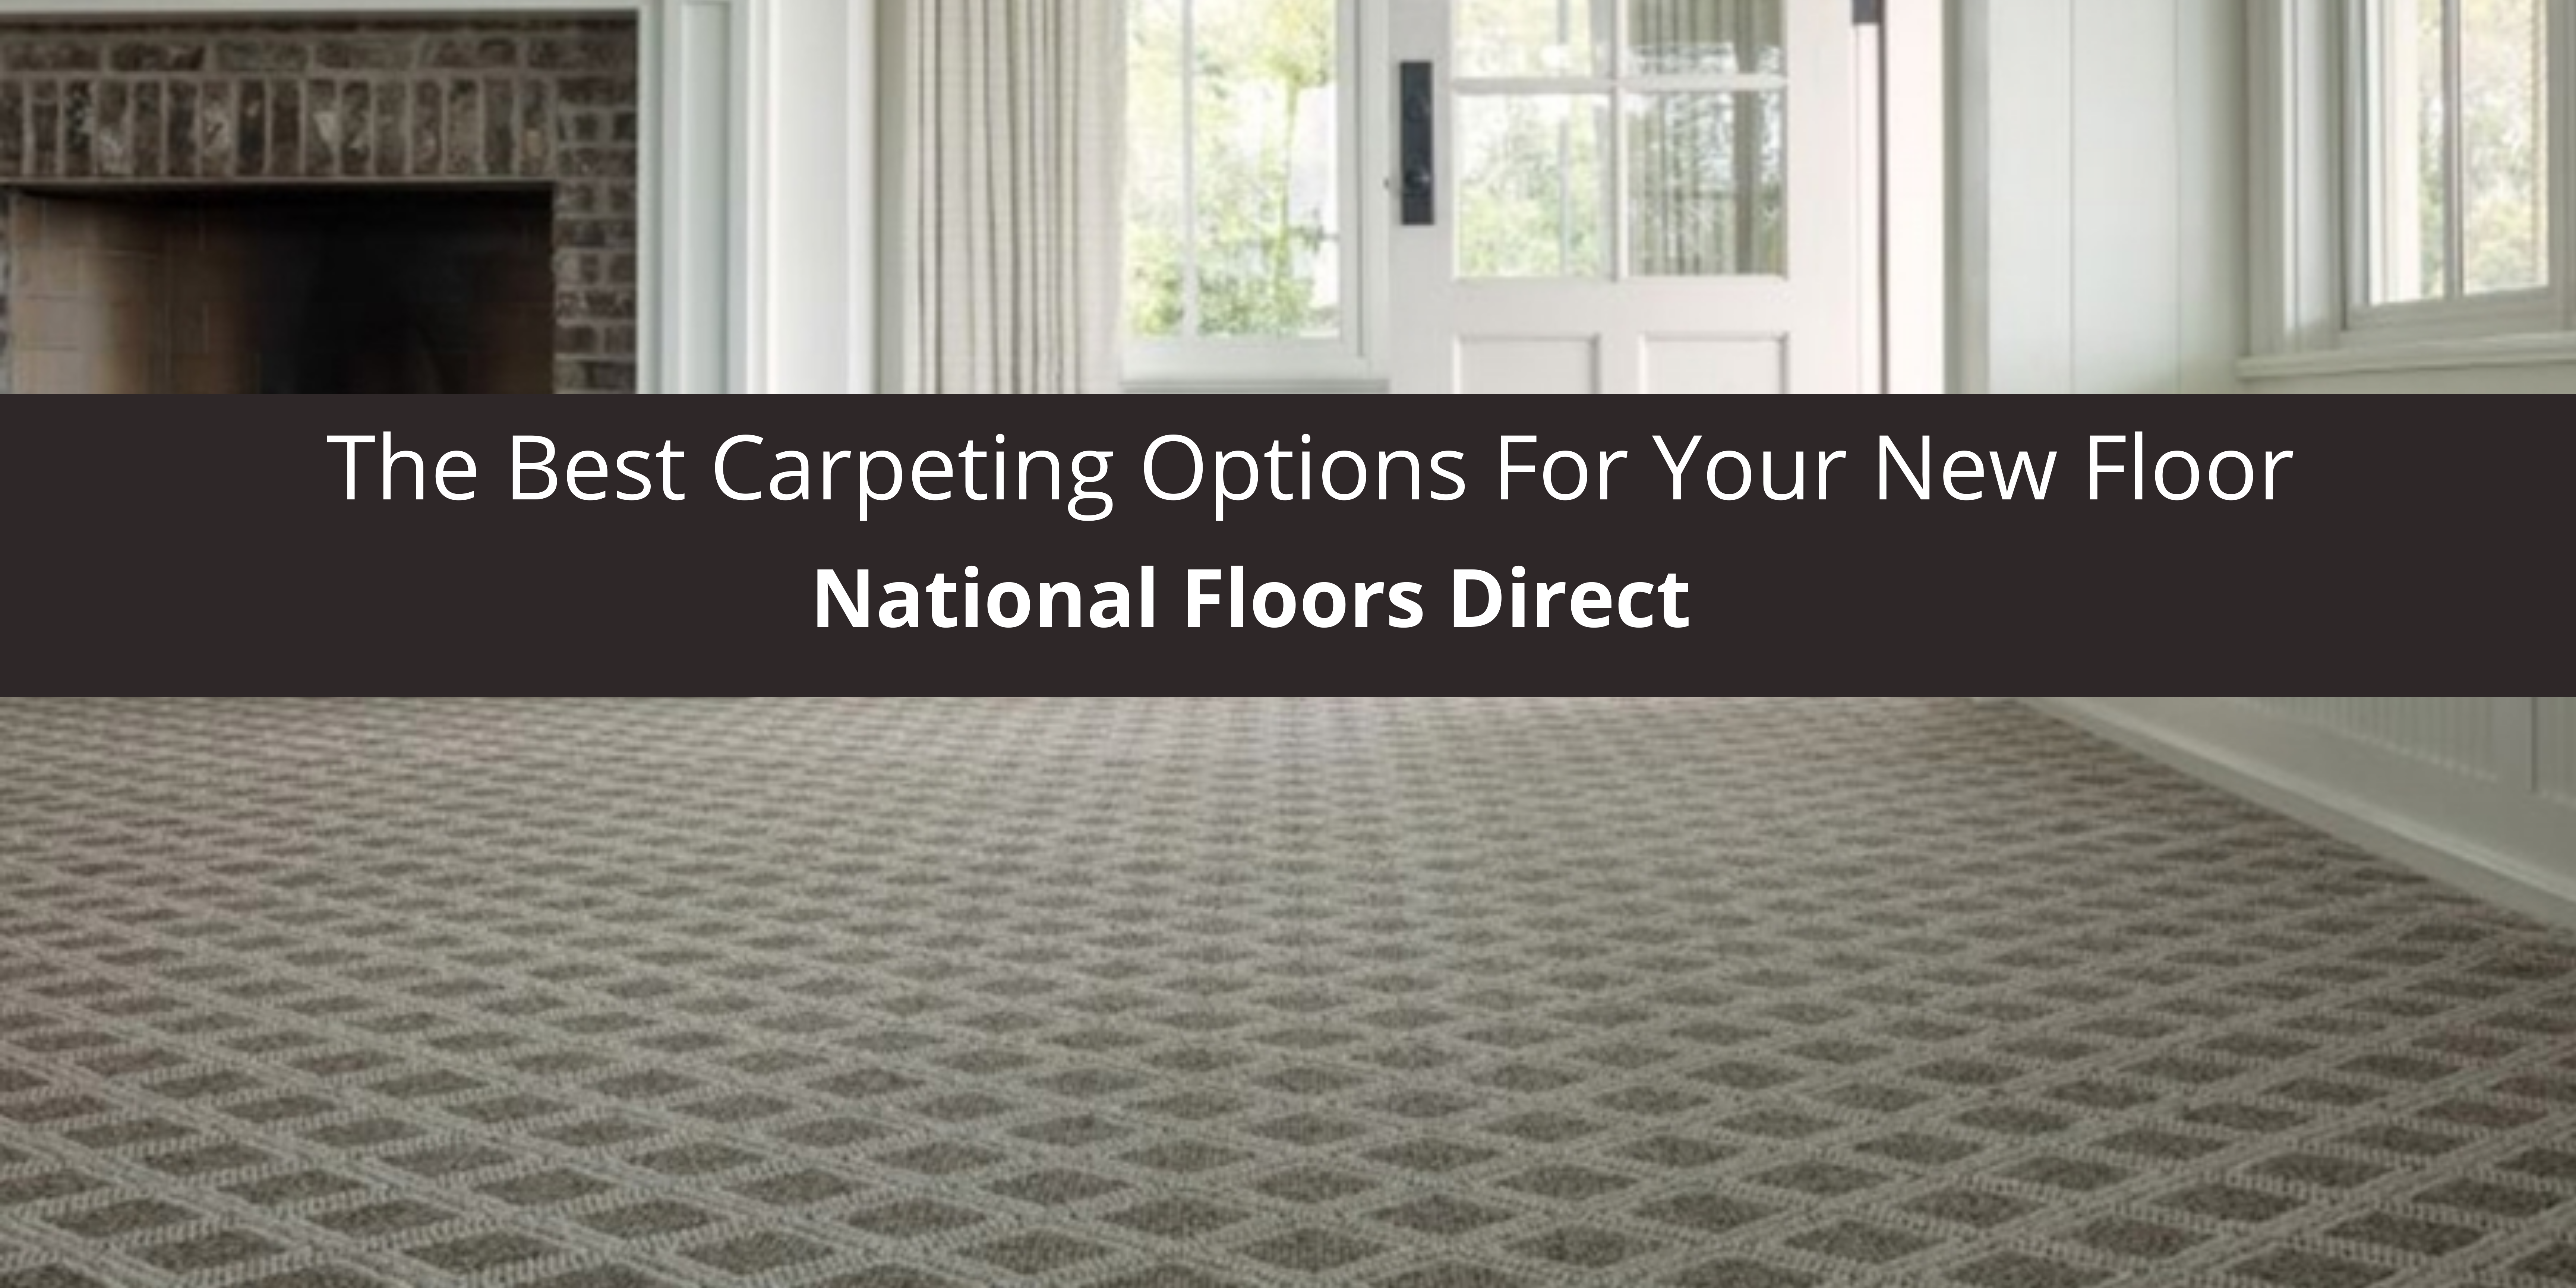 National Floors Direct Reviews The Best Carpeting For Your New Floor